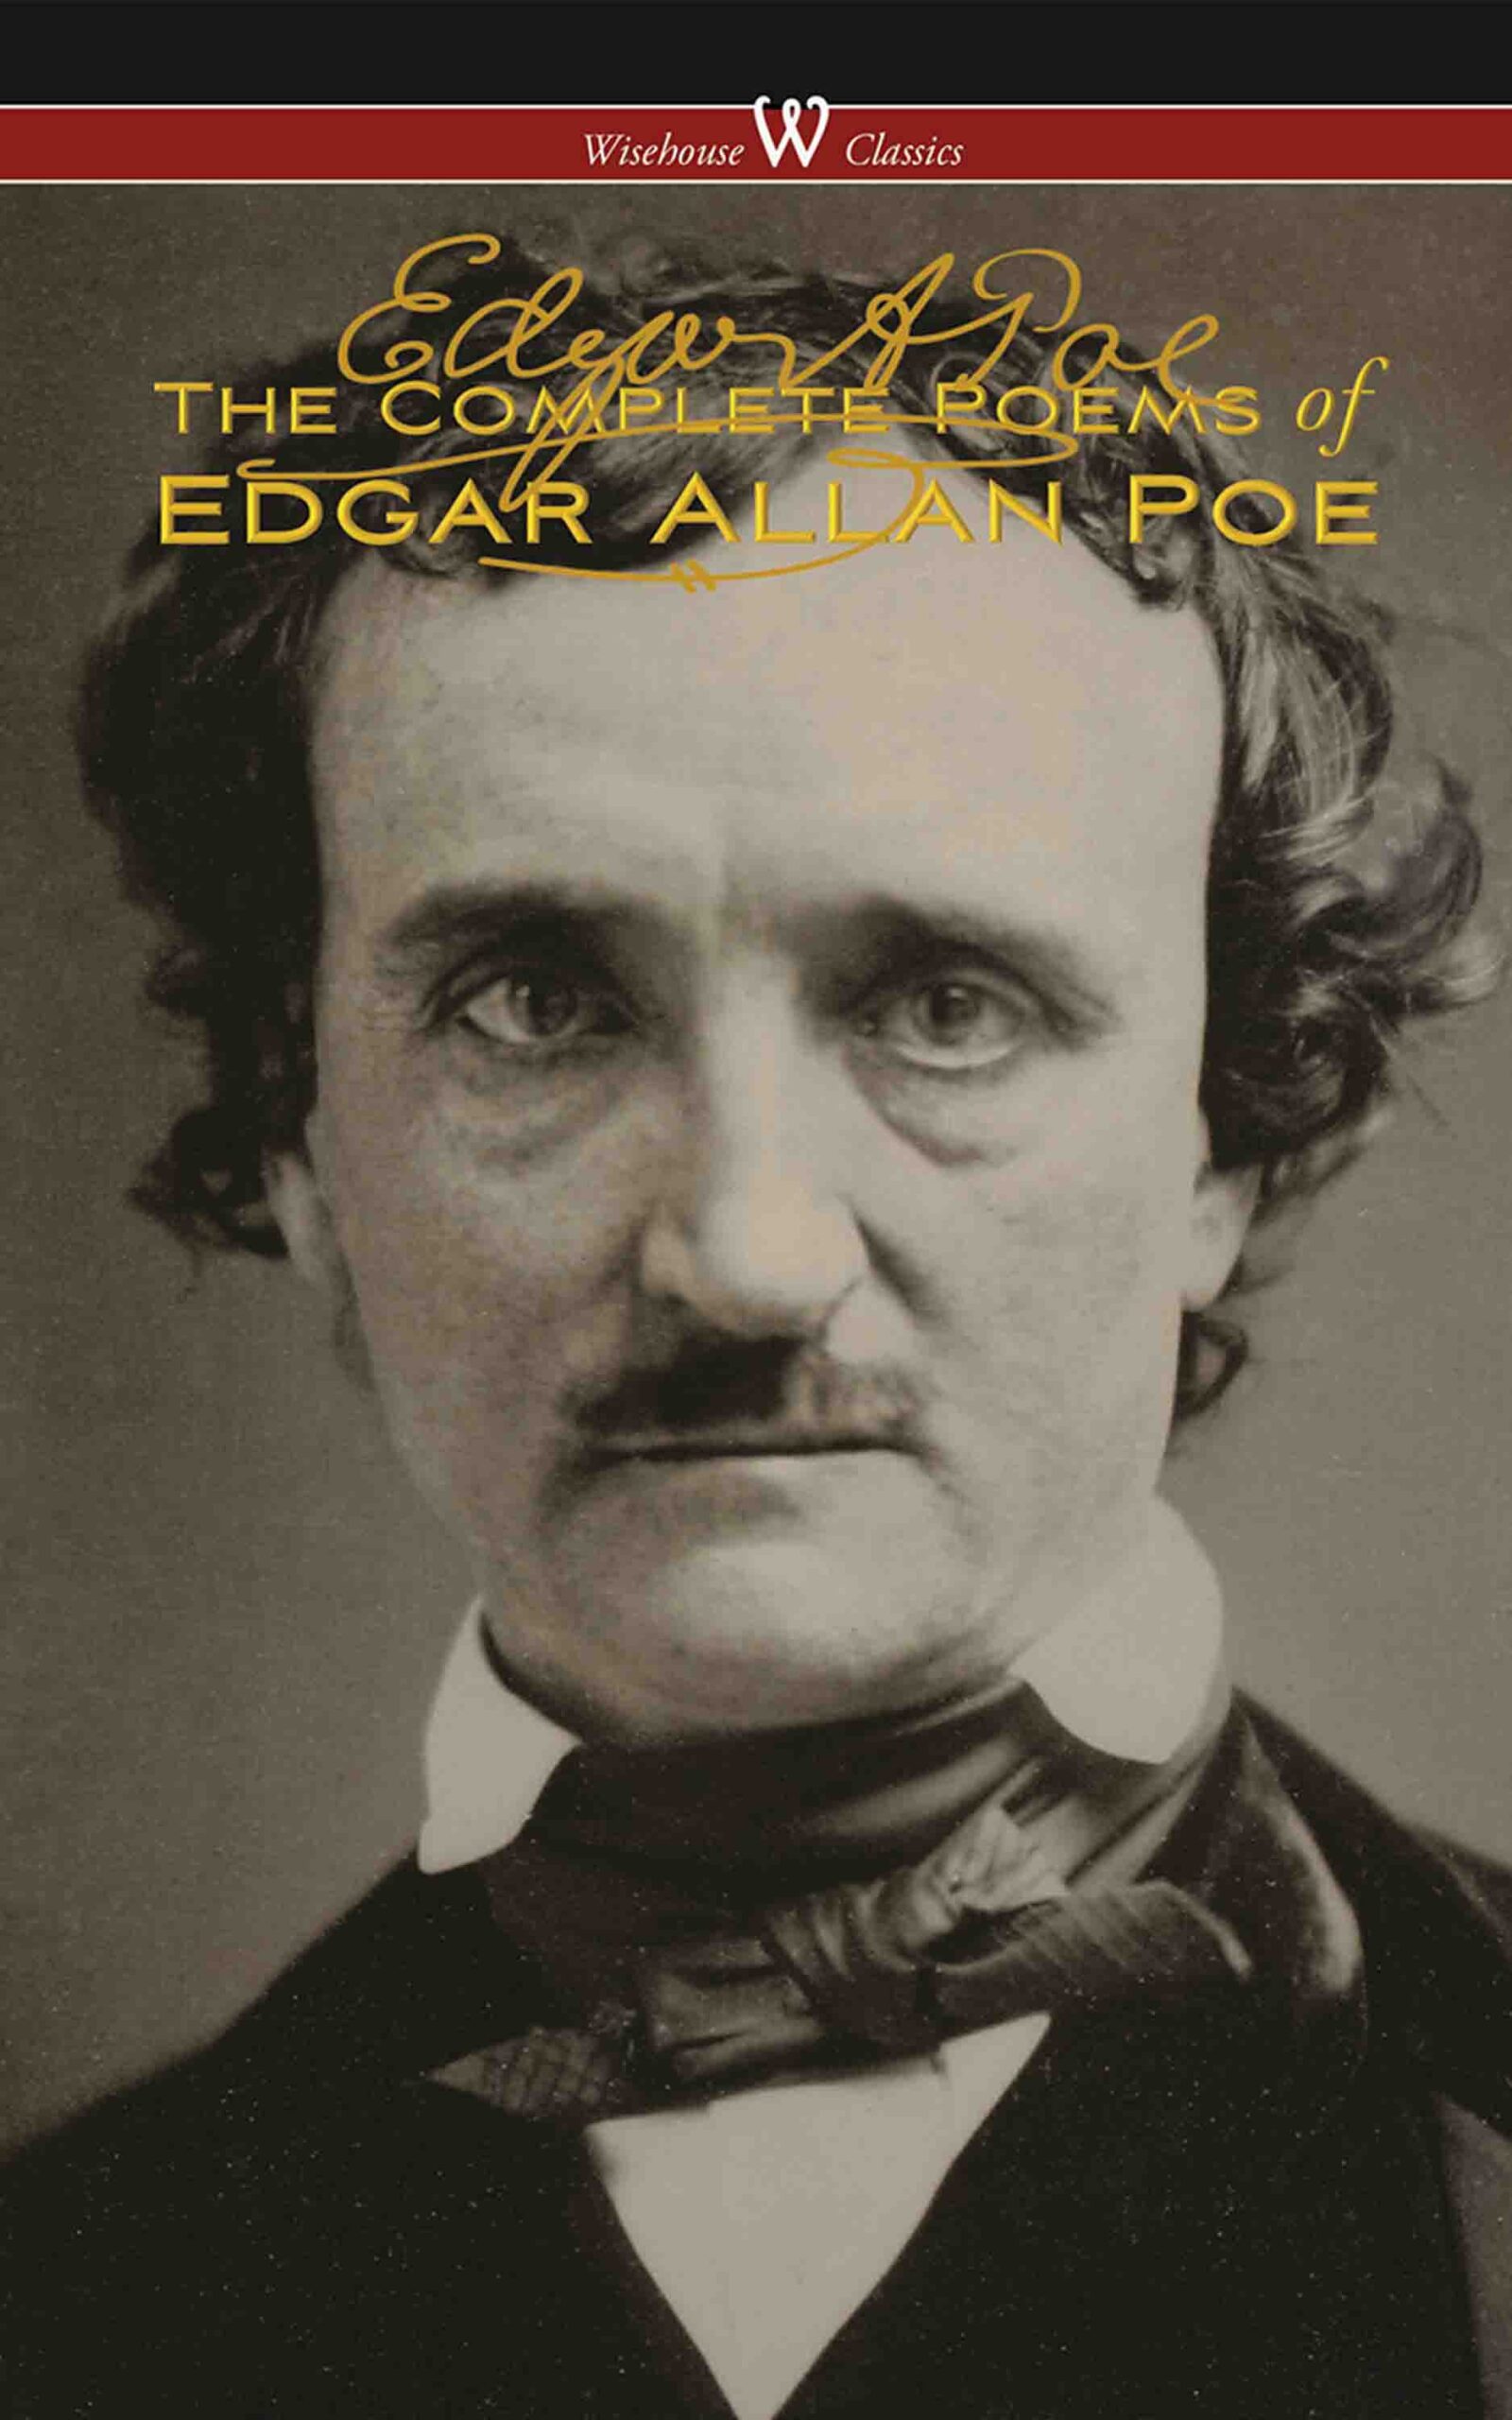 The Complete Poems of Edgar Allan Poe (Wisehouse Classics Edition)